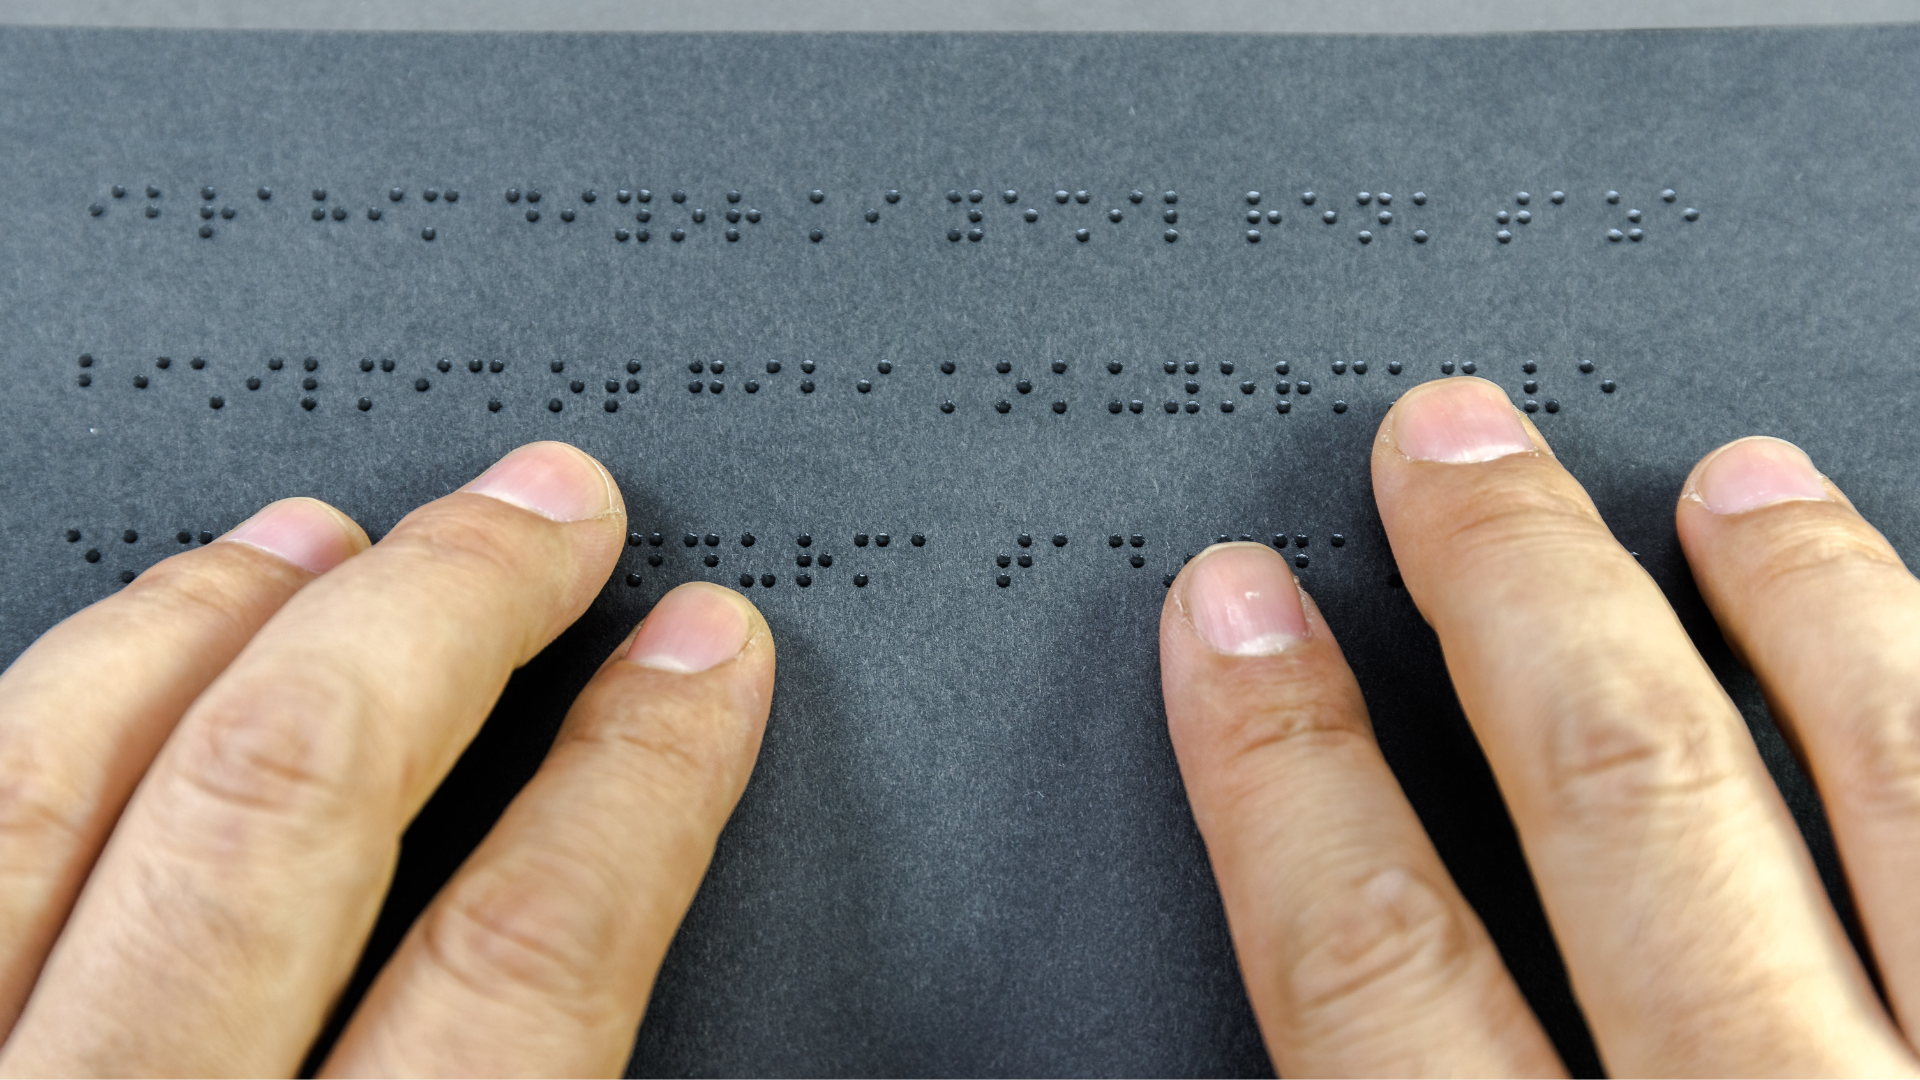 World Braille Day is marked on January 4 every year. NGOs are using braille to spread education among the blind and the visually impaired